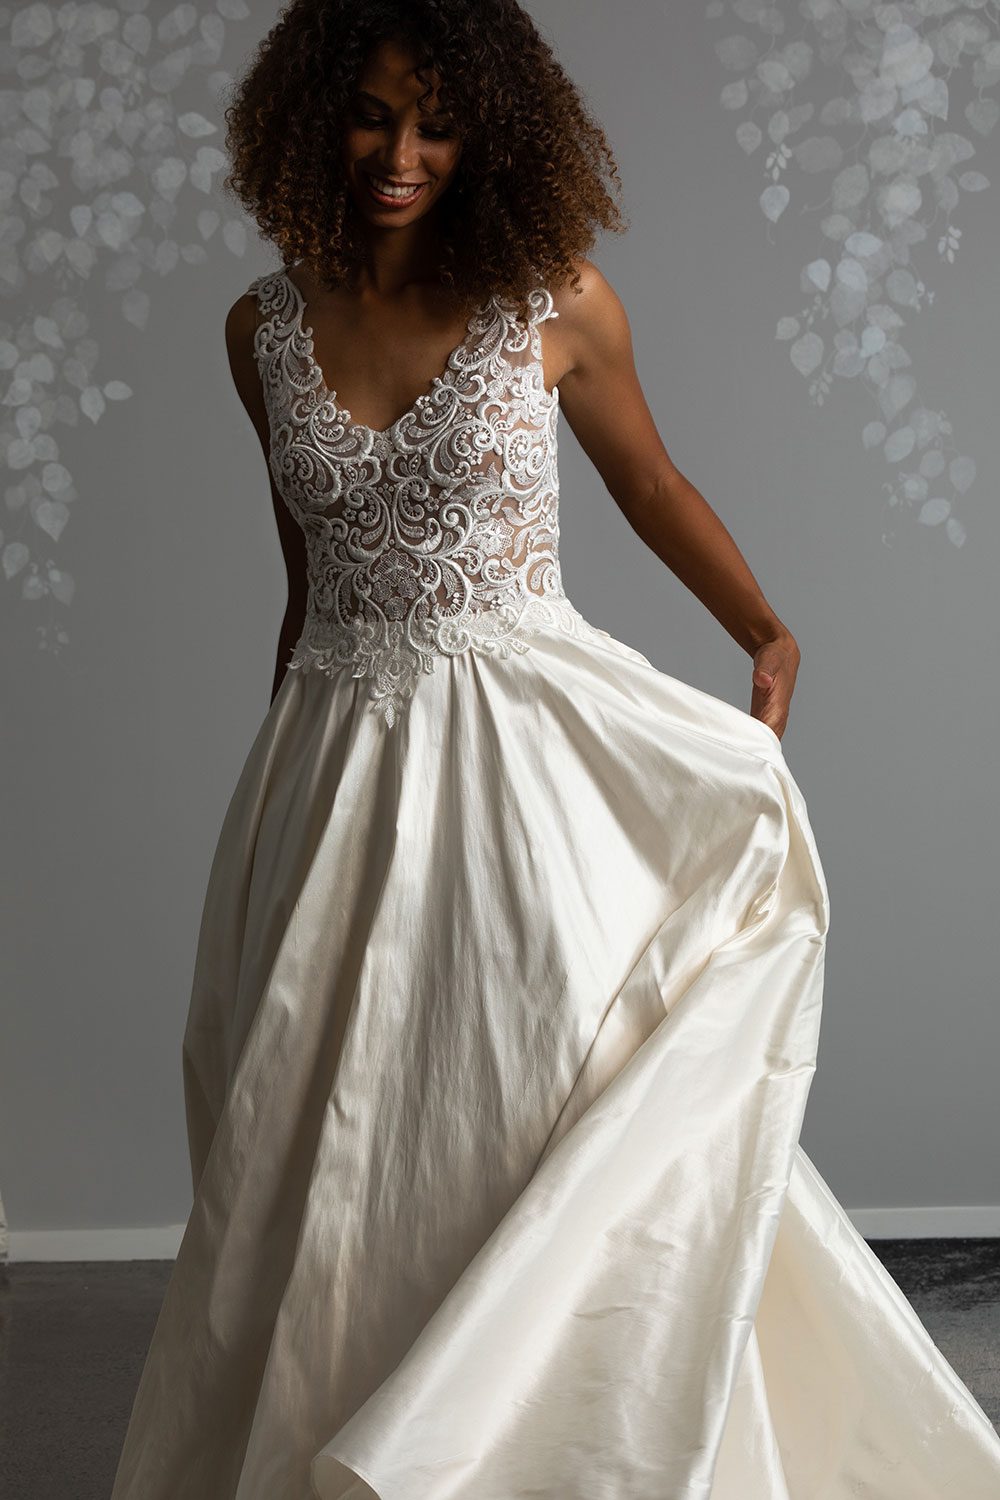 Brooke Wedding Dress from Vinka Design. This stunning wedding dress has a structured bodice intricately layered to emphasize natural curves. Sweetheart neckline, delicate lace-embellished straps, low back & silk chiffon train. Front view of model holding dupion silk skirt